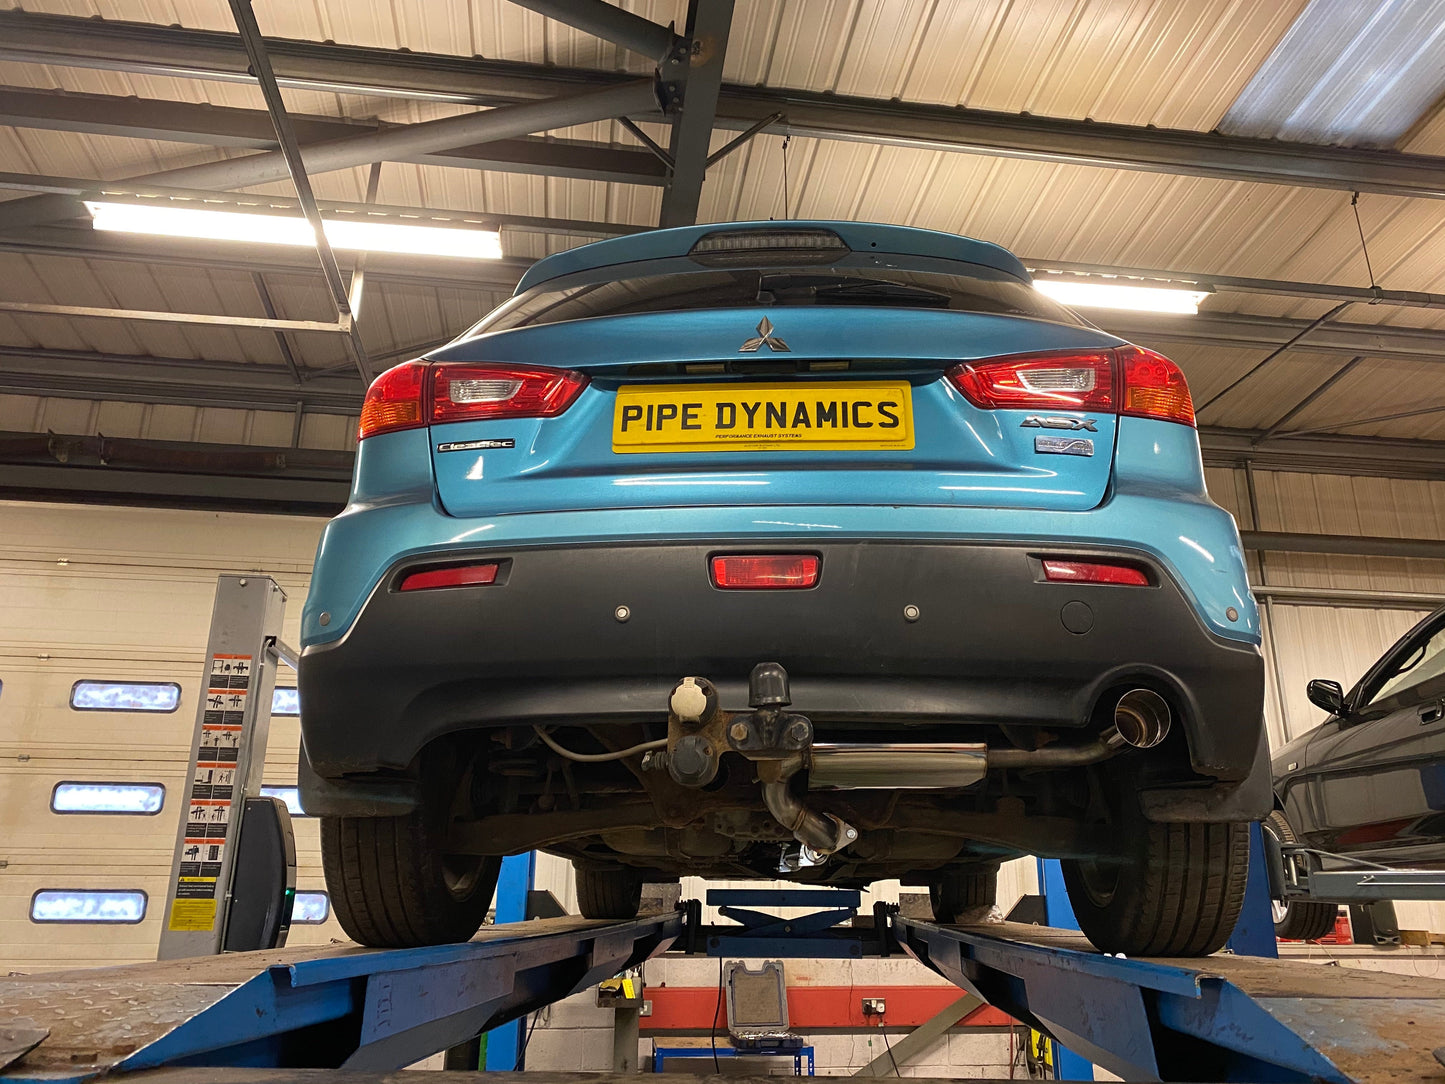 Mitsubishi ASX 1.8 Diesel 150bhp - Replacement exhaust from DPF back (middle and Rear) Pipe Dynamics ASX